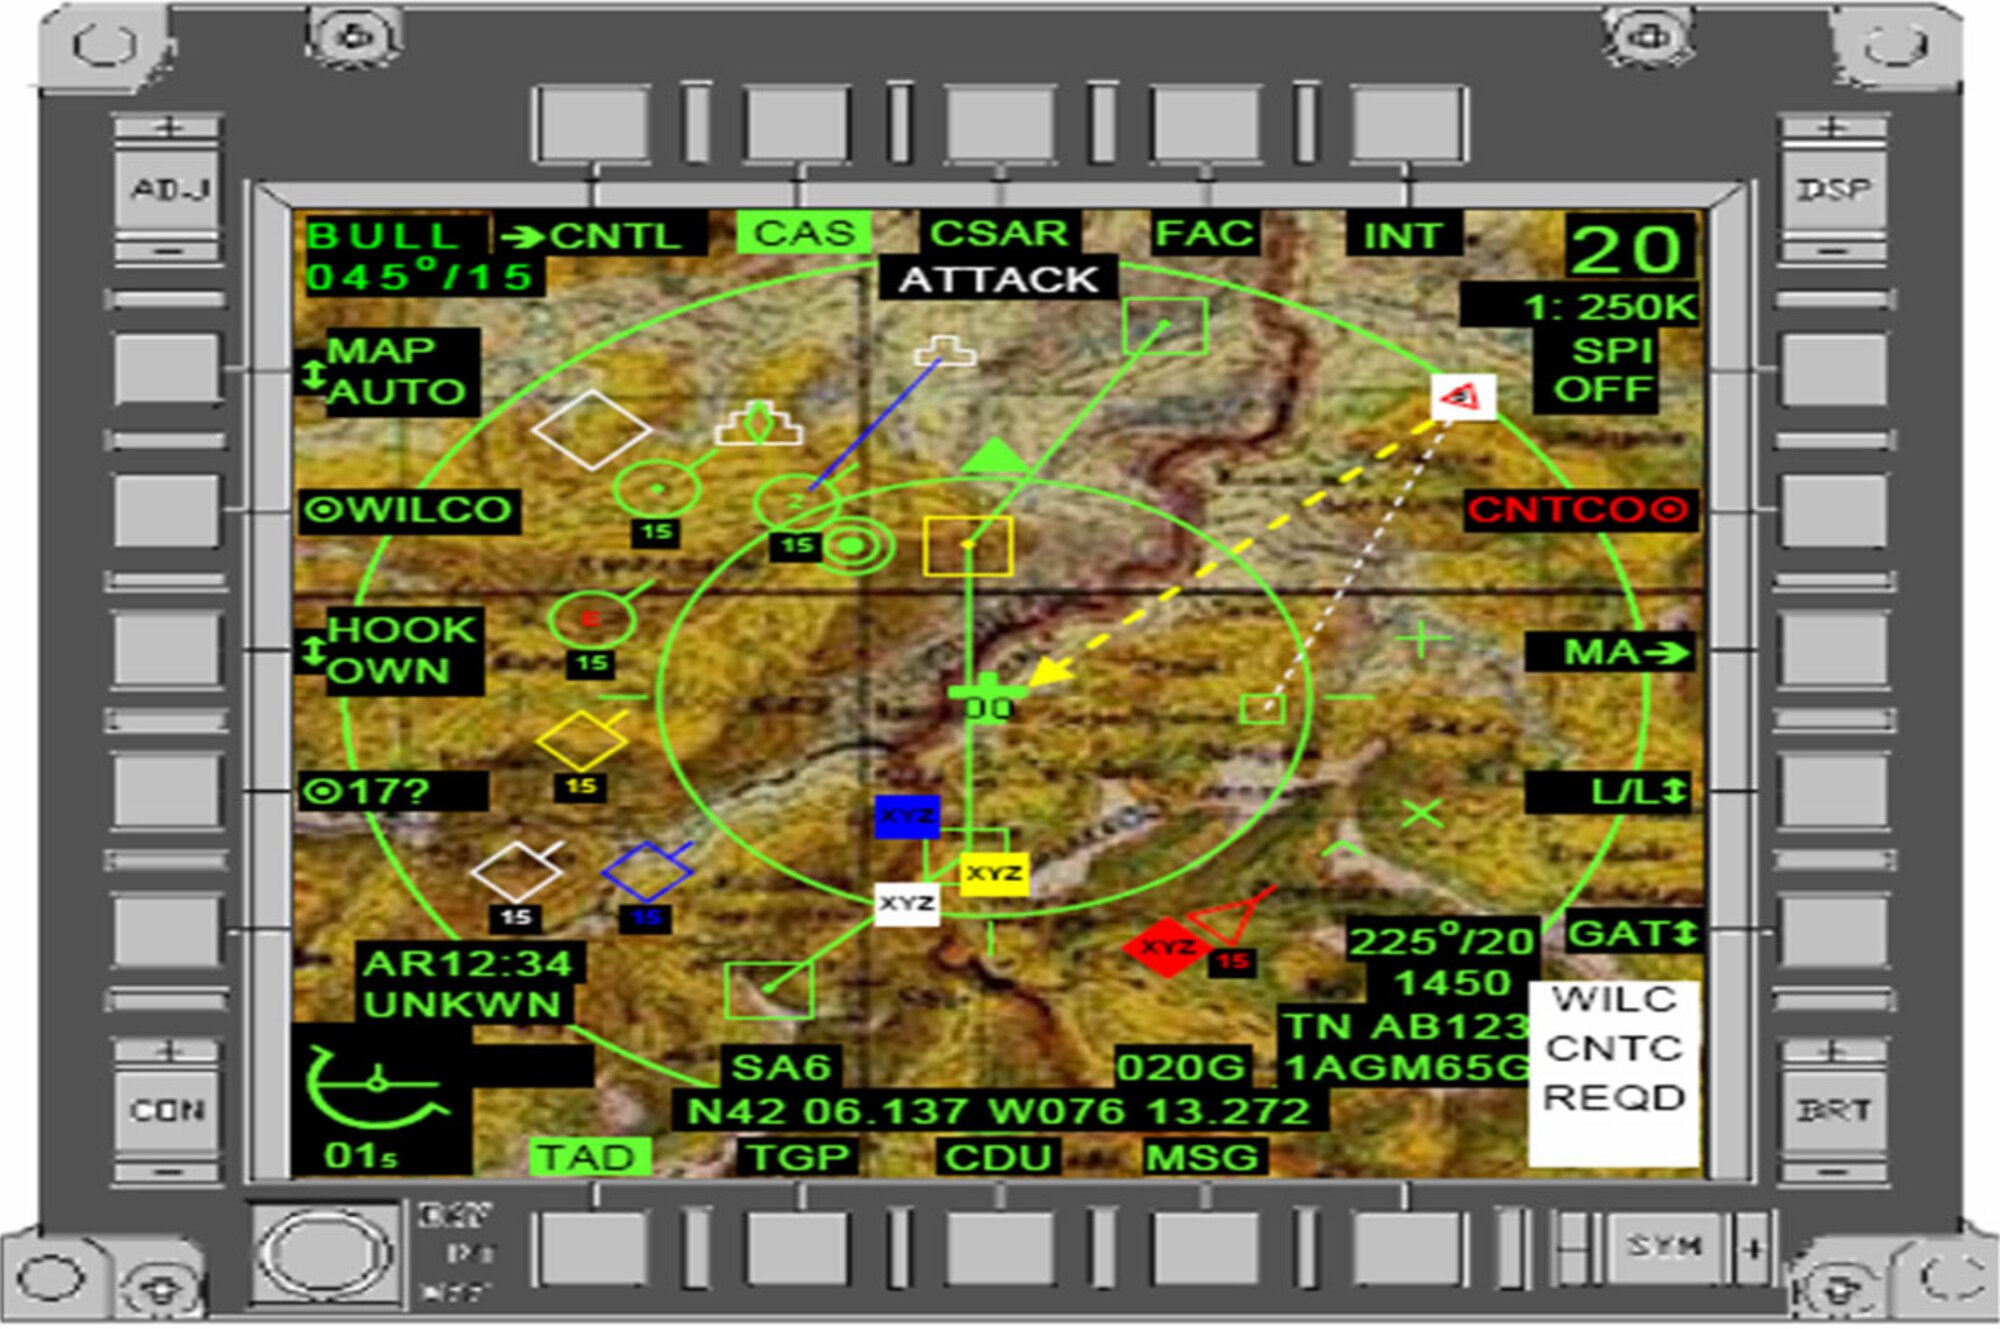 The most significant change to the A-10C is the addition of the Situational Awareness Data Link, or SADL.  With SADL, the A-10C joins a massive “internet-like” network of land, air, and sea systems.  Each individual member “uploads” information for other platforms to see and use, and “downloads” information that it can use to better perform its mission. Pictured is a representation of what the dat link looks like to pilots. (Courtesy graphic)